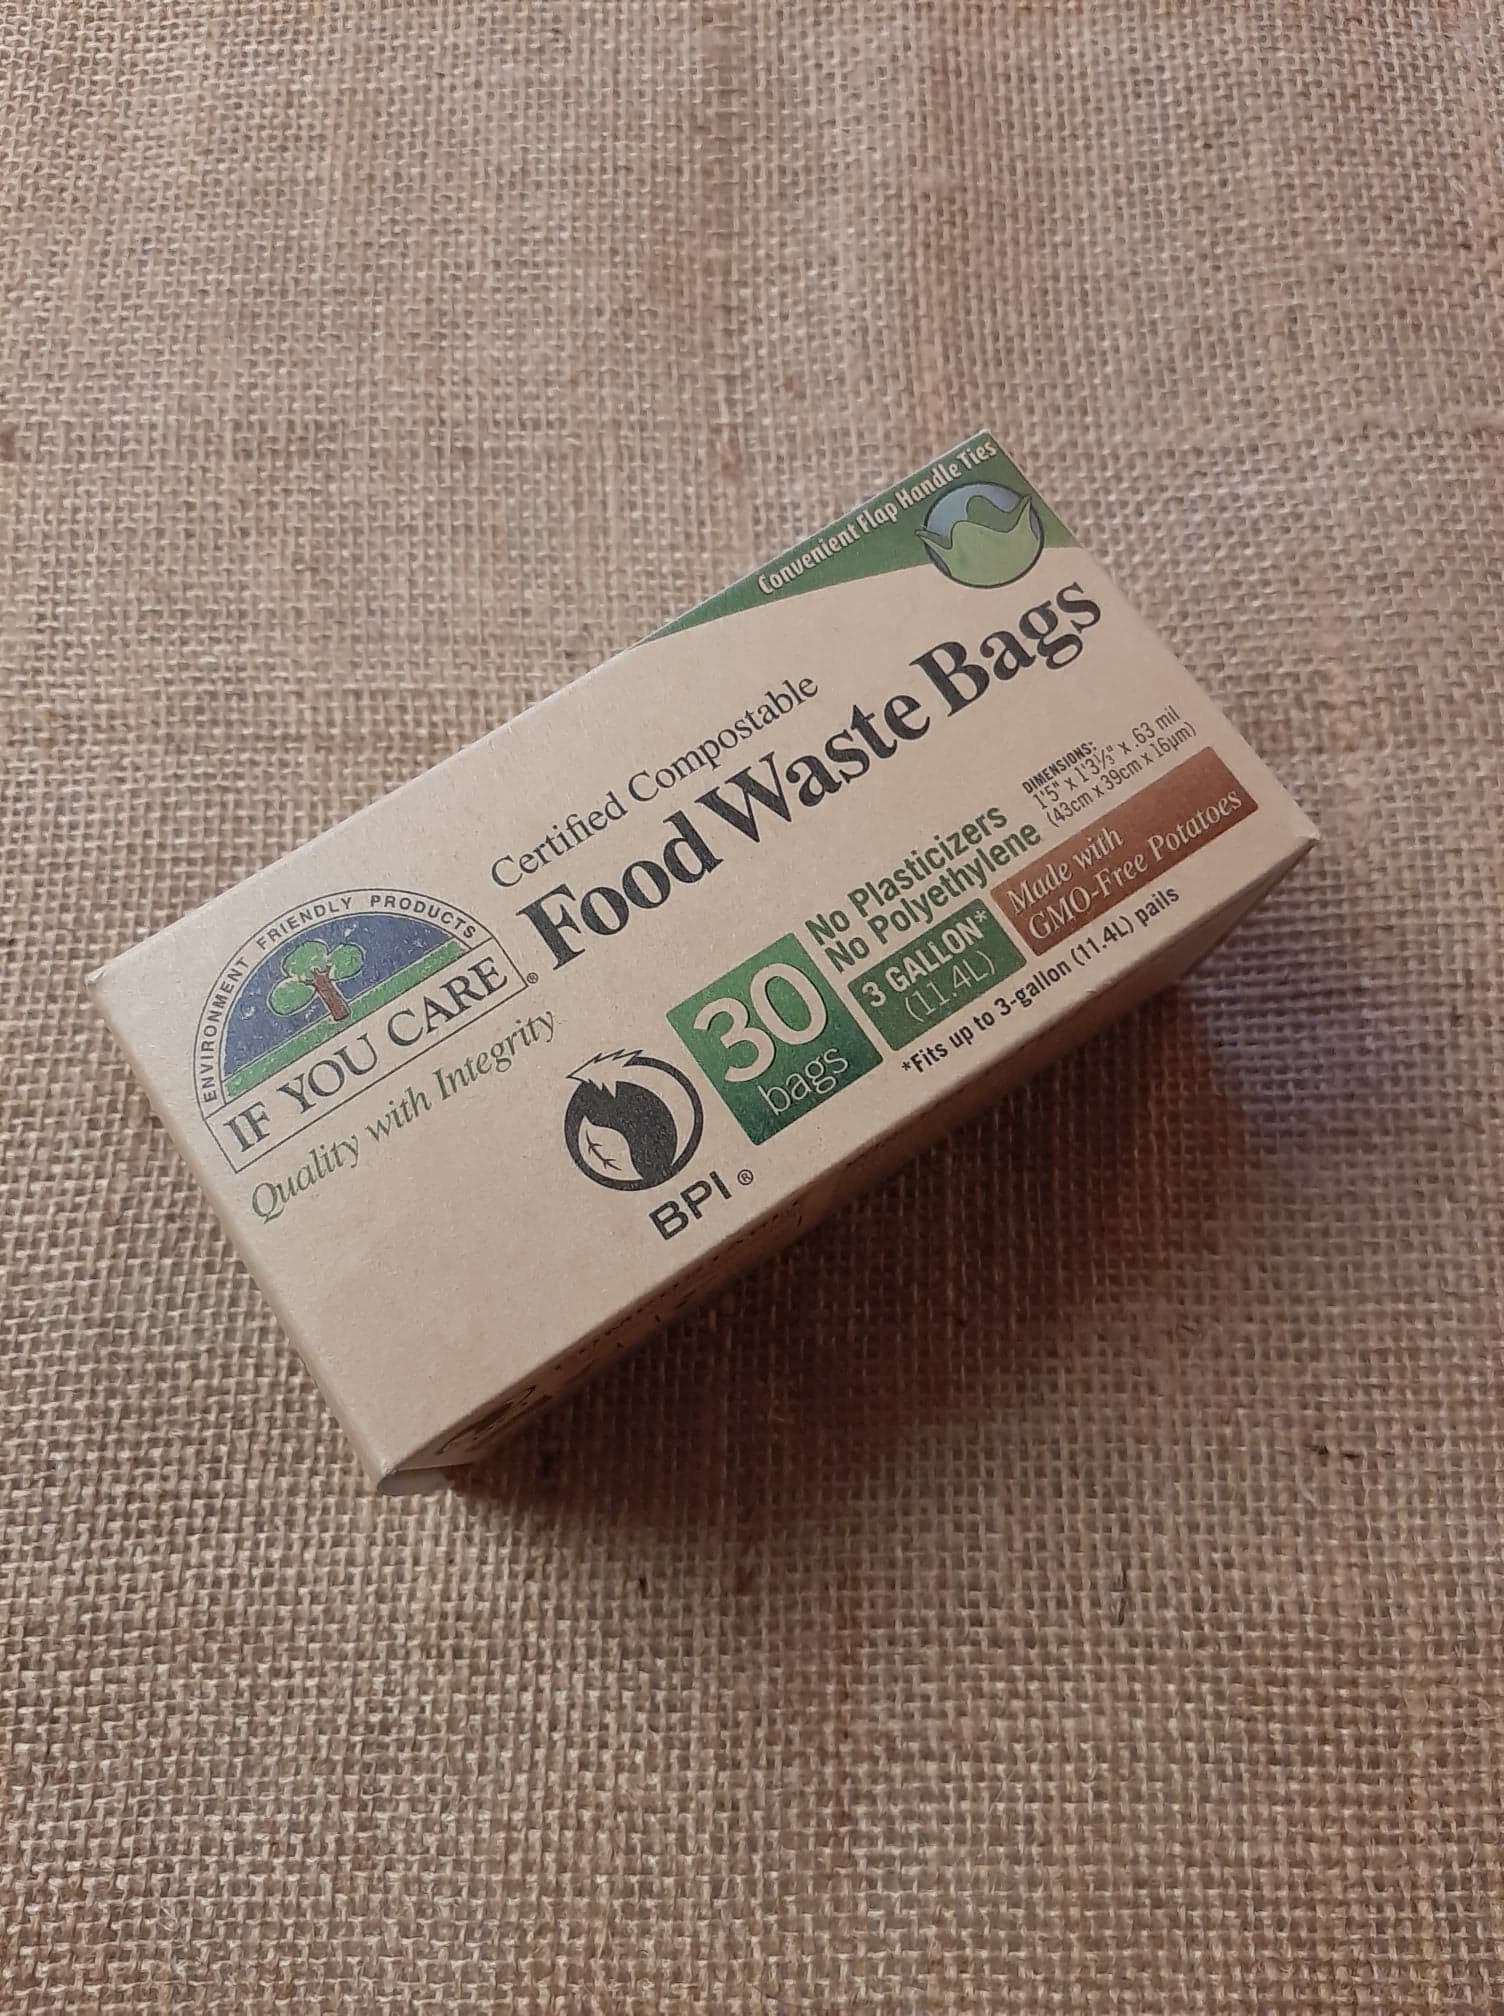 Food Waste Bags - Compostable 30 or 100